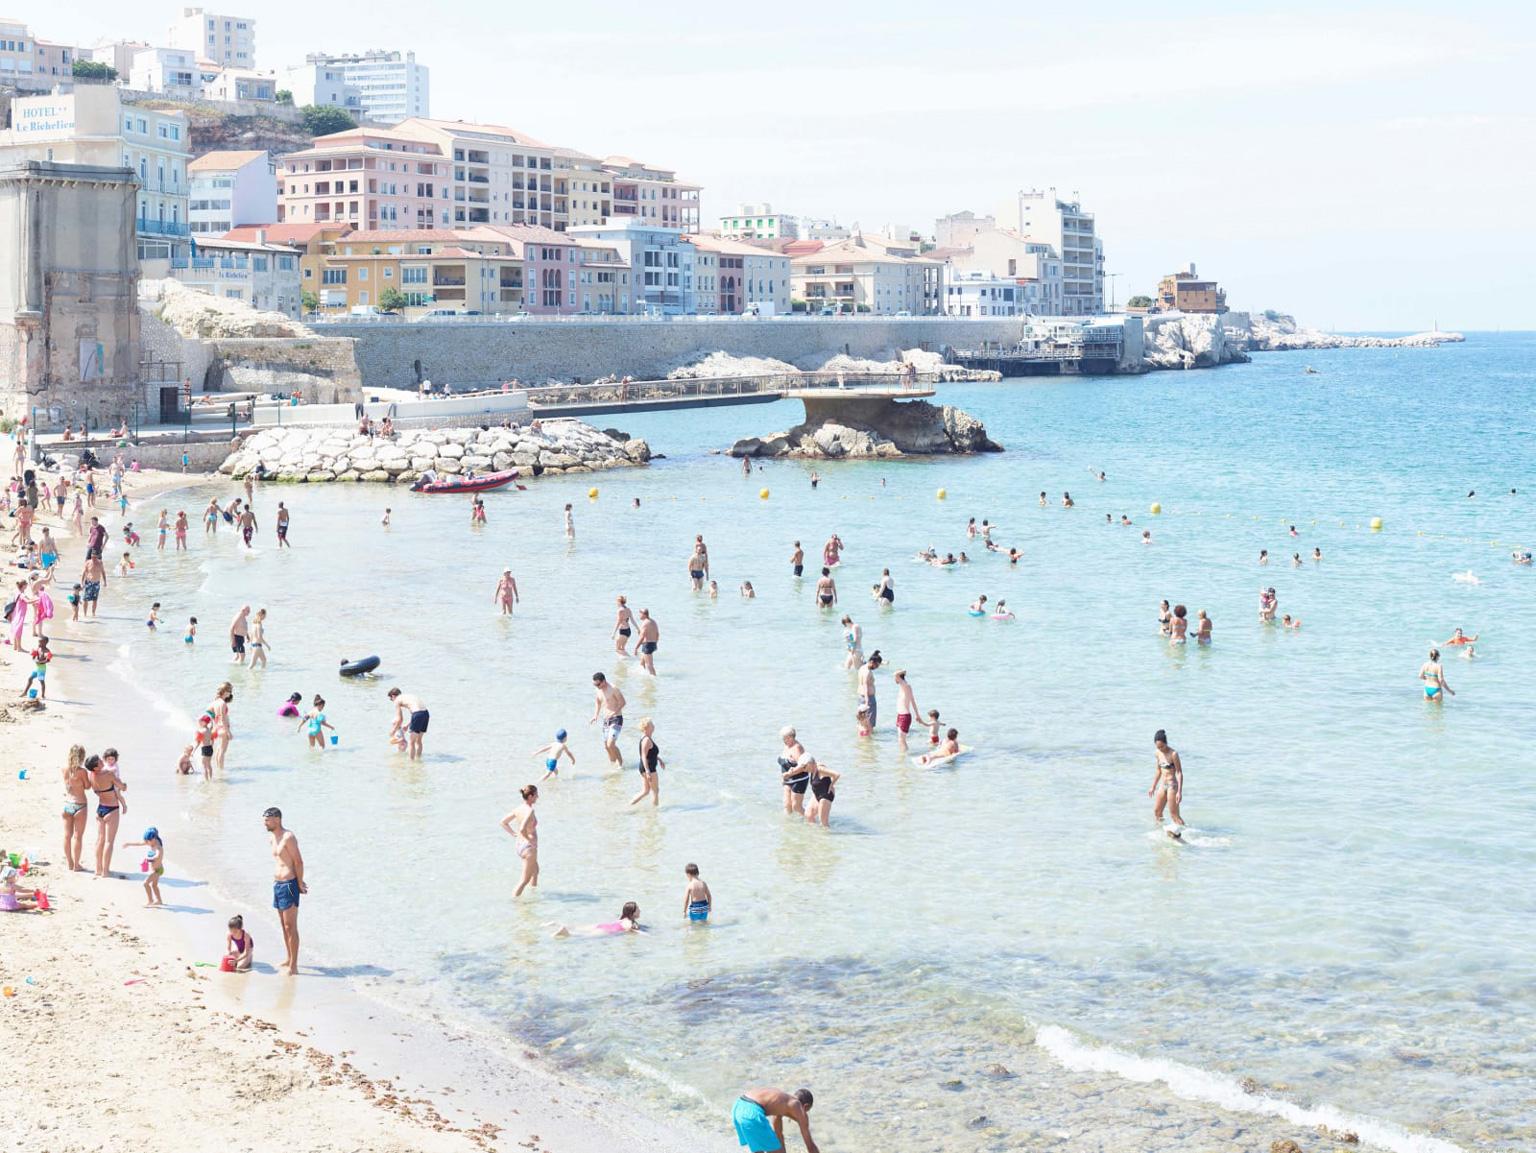 Plage des Catalans (framed) - large scale photograph of Mediterranean beach  - Print by Massimo Vitali